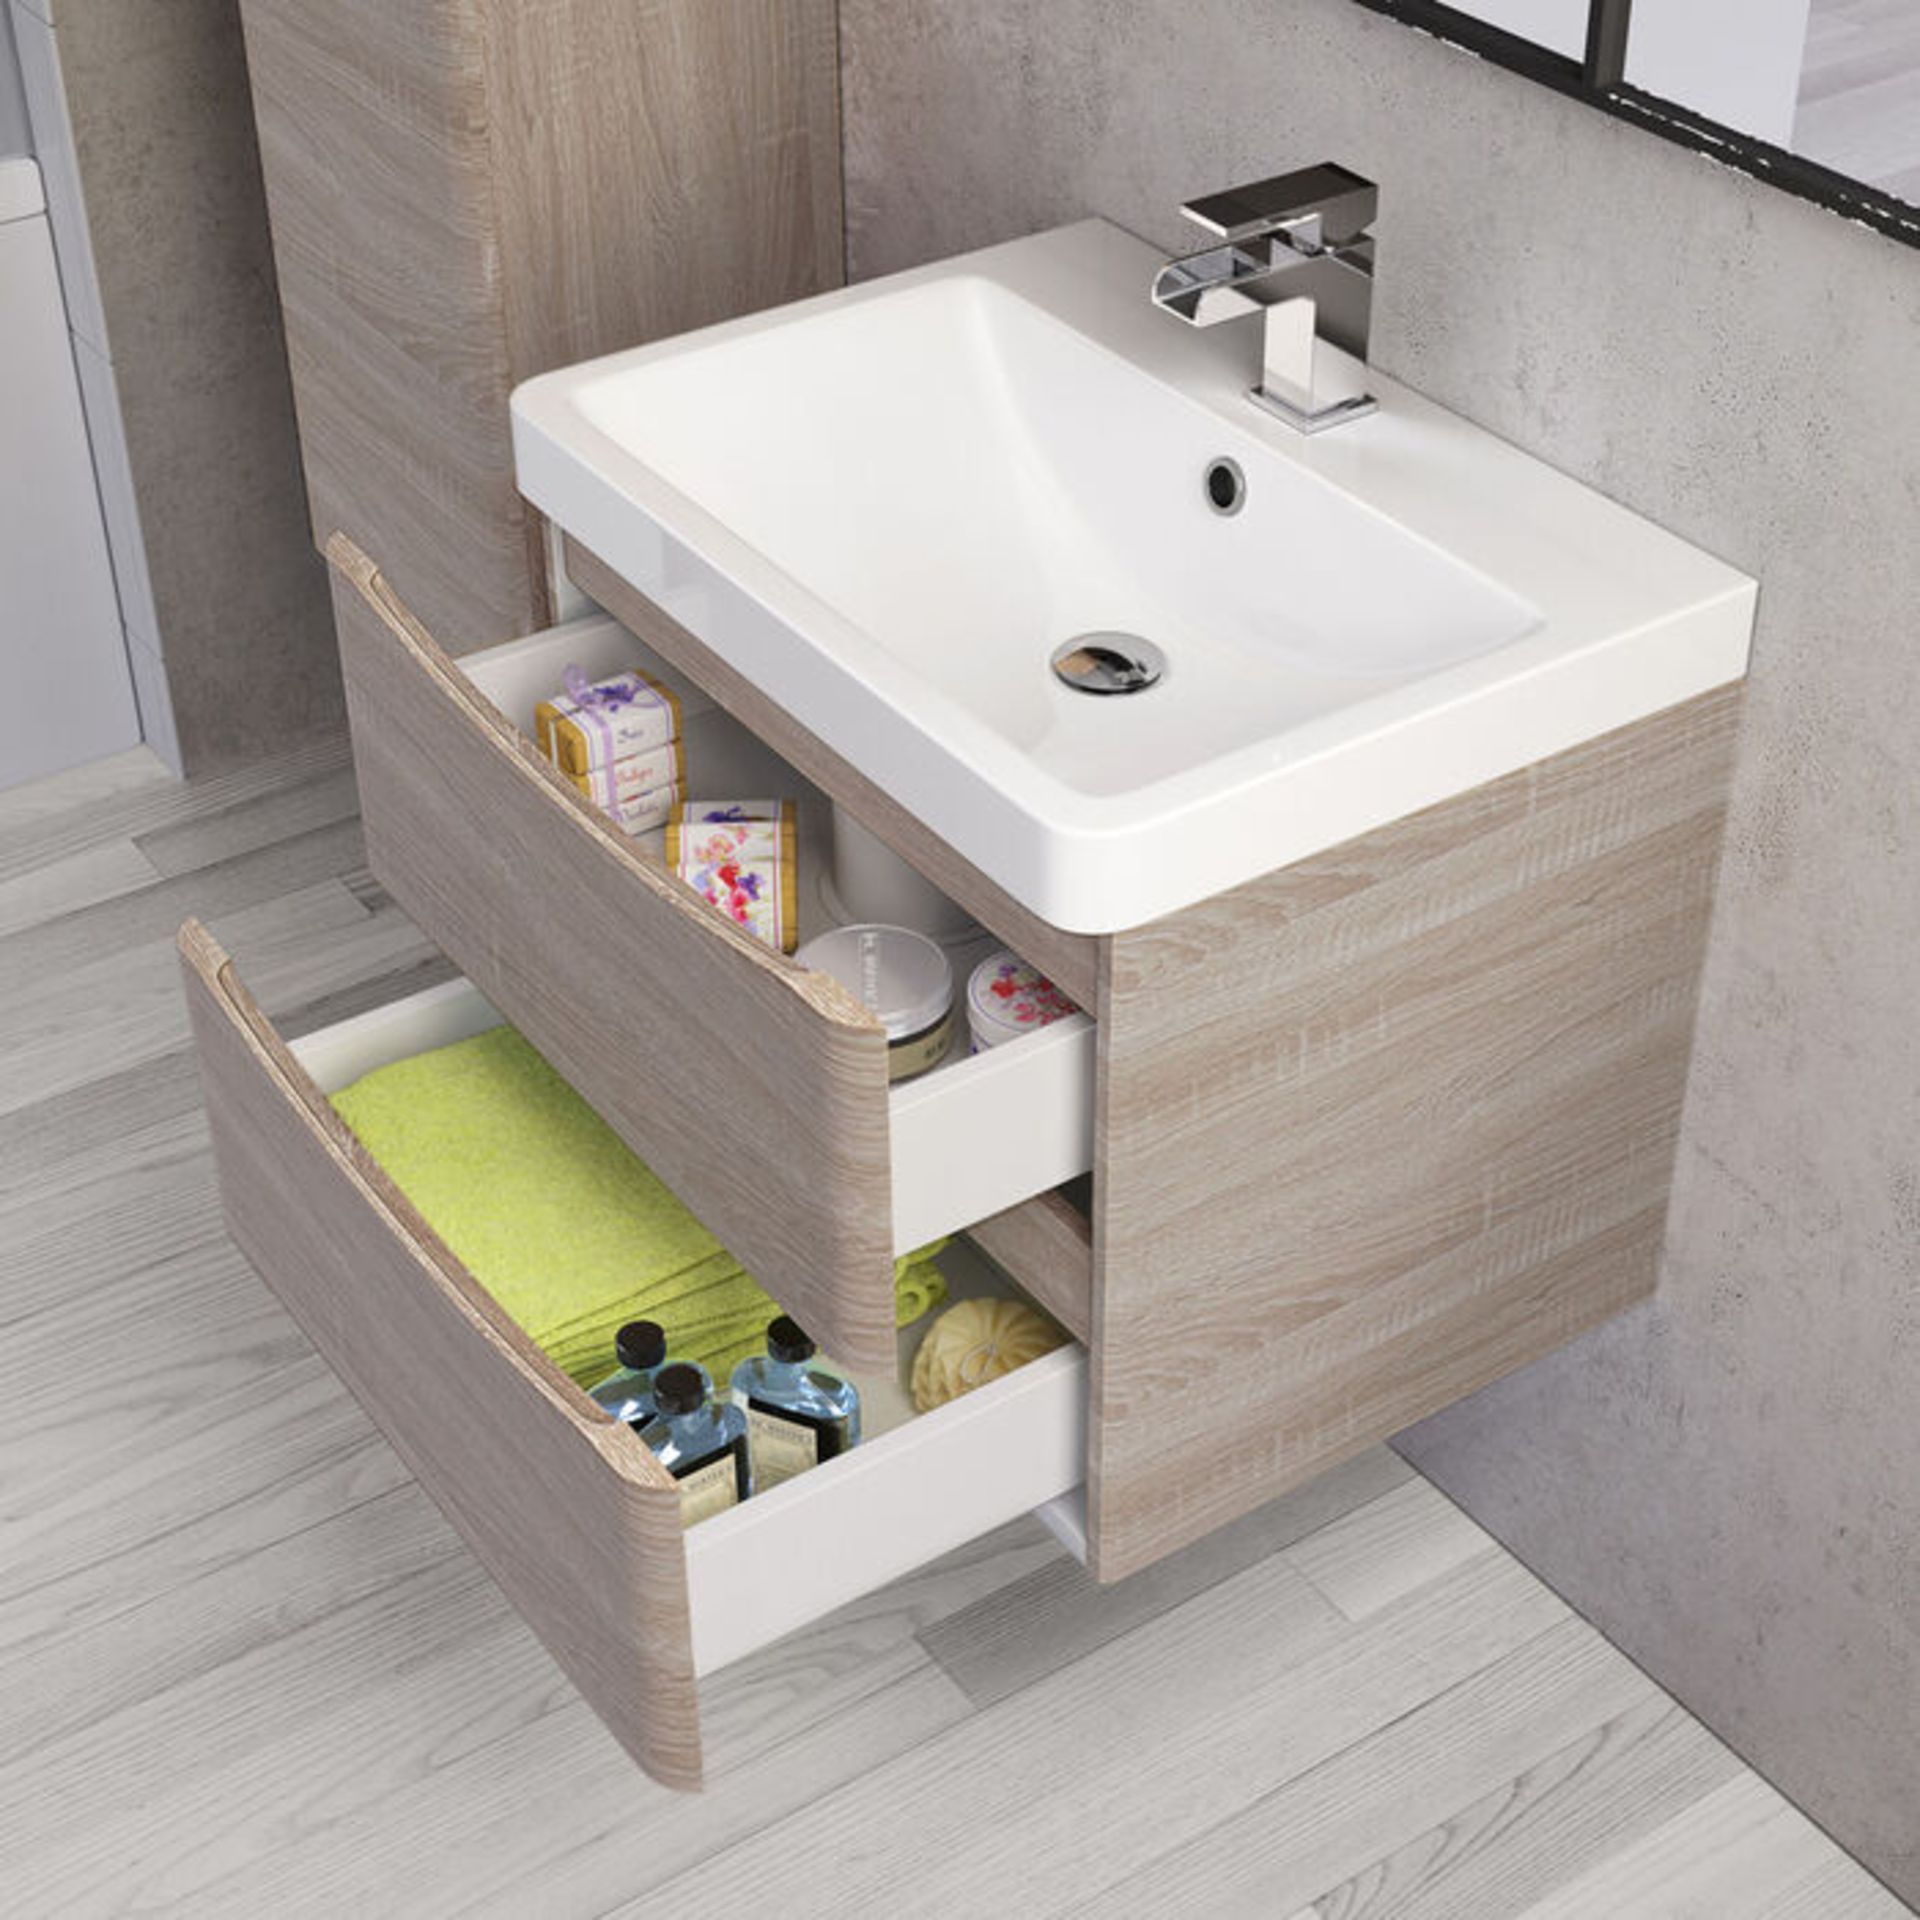 NEW & BOXED 600mm Austin II Light Oak Effect Built In Sink Drawer Unit - Wall Hung. RRP ... - Image 2 of 3